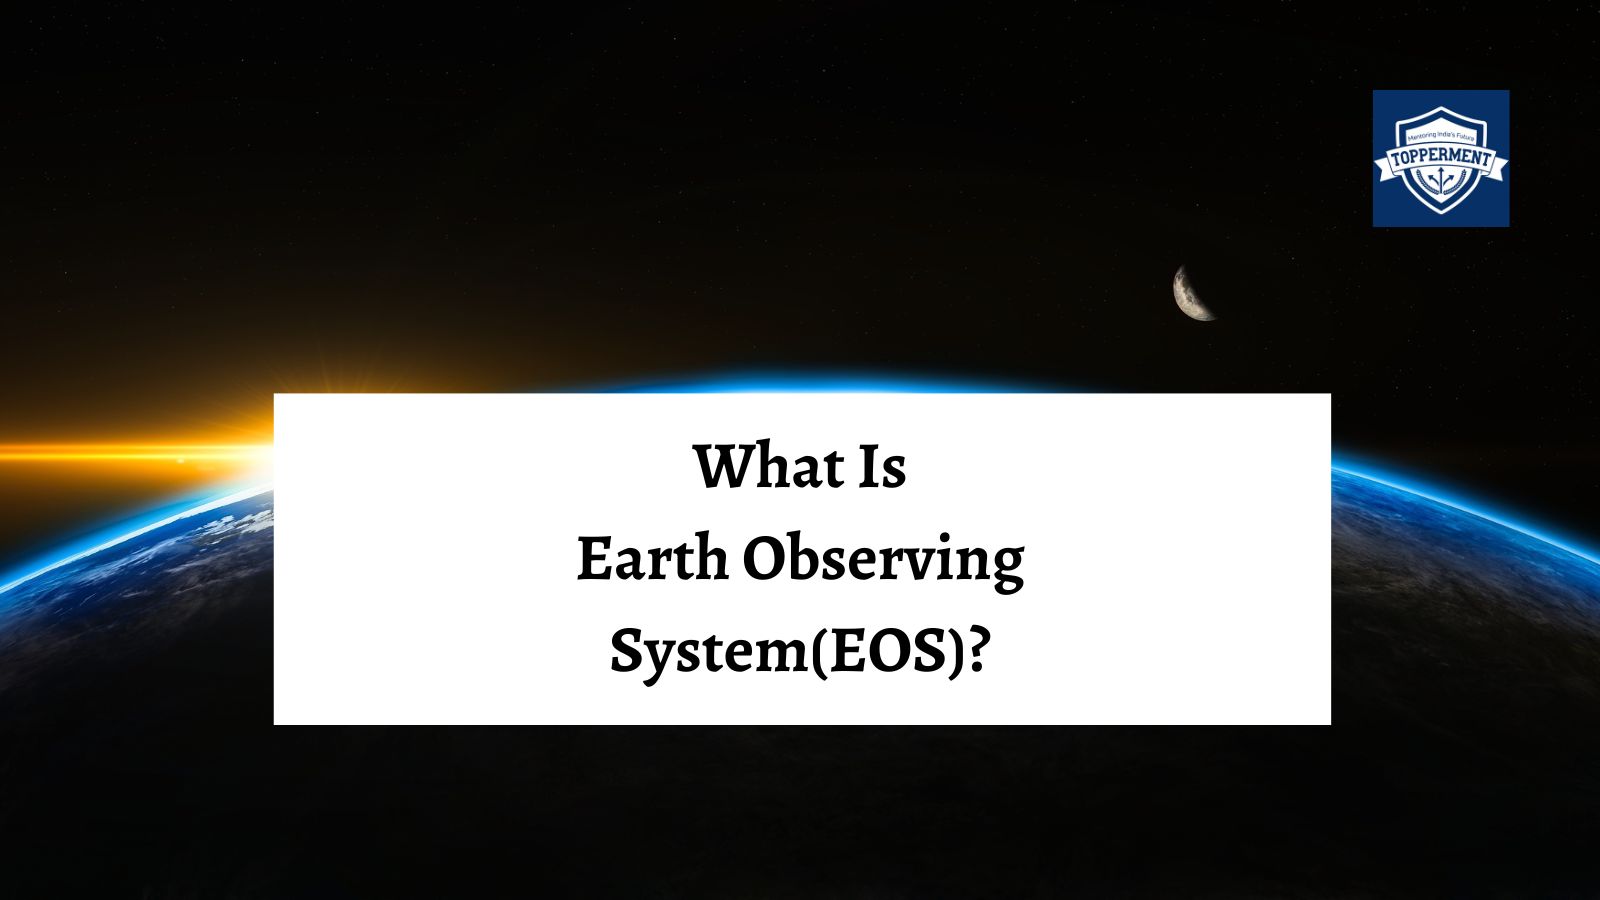 Earth Observing System (EOS) Global Earth Monitoring System | Best UPSC IAS Coaching For Mentorship And Guidance